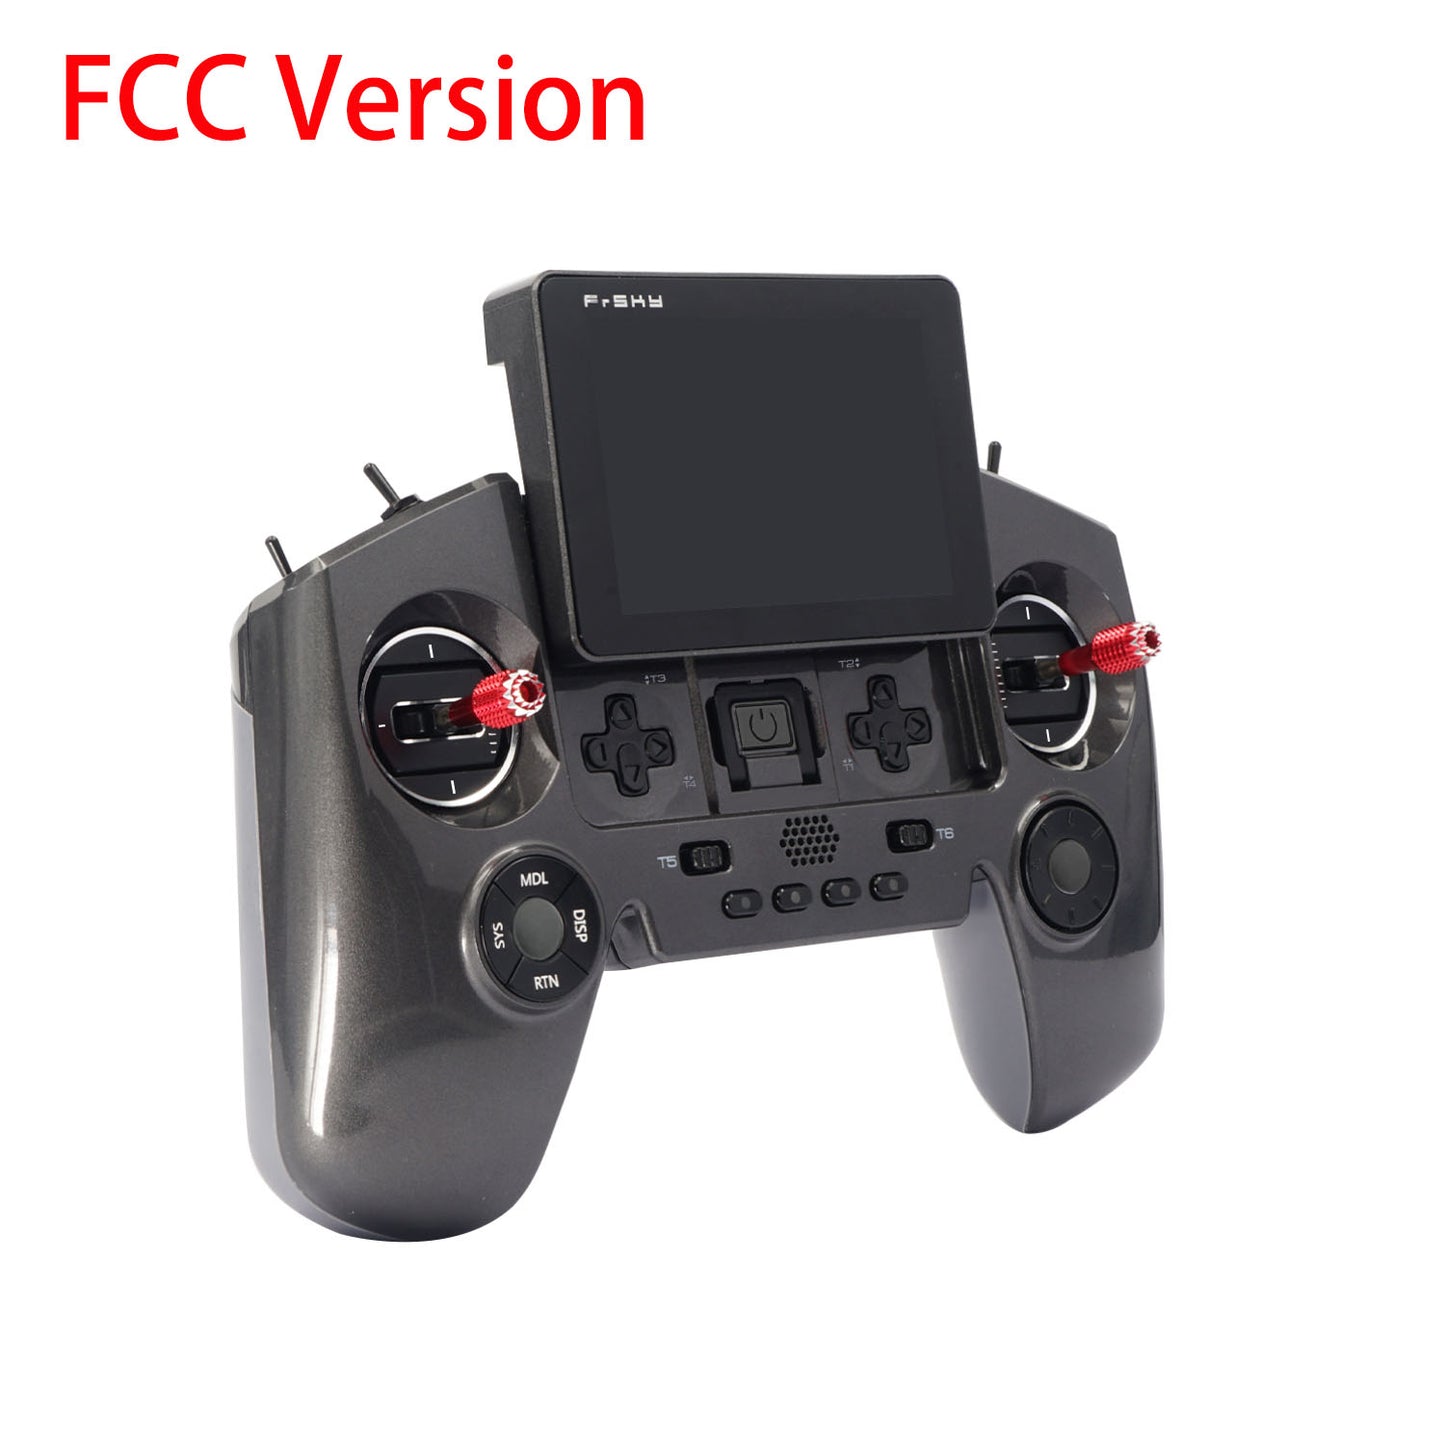 FrSky Transmitter TWIN X LiteS Built-in 6-Axis Gyroscope Sensor Support ACCST D16 ACCESS TW Mode FCC for RC Drone FCC